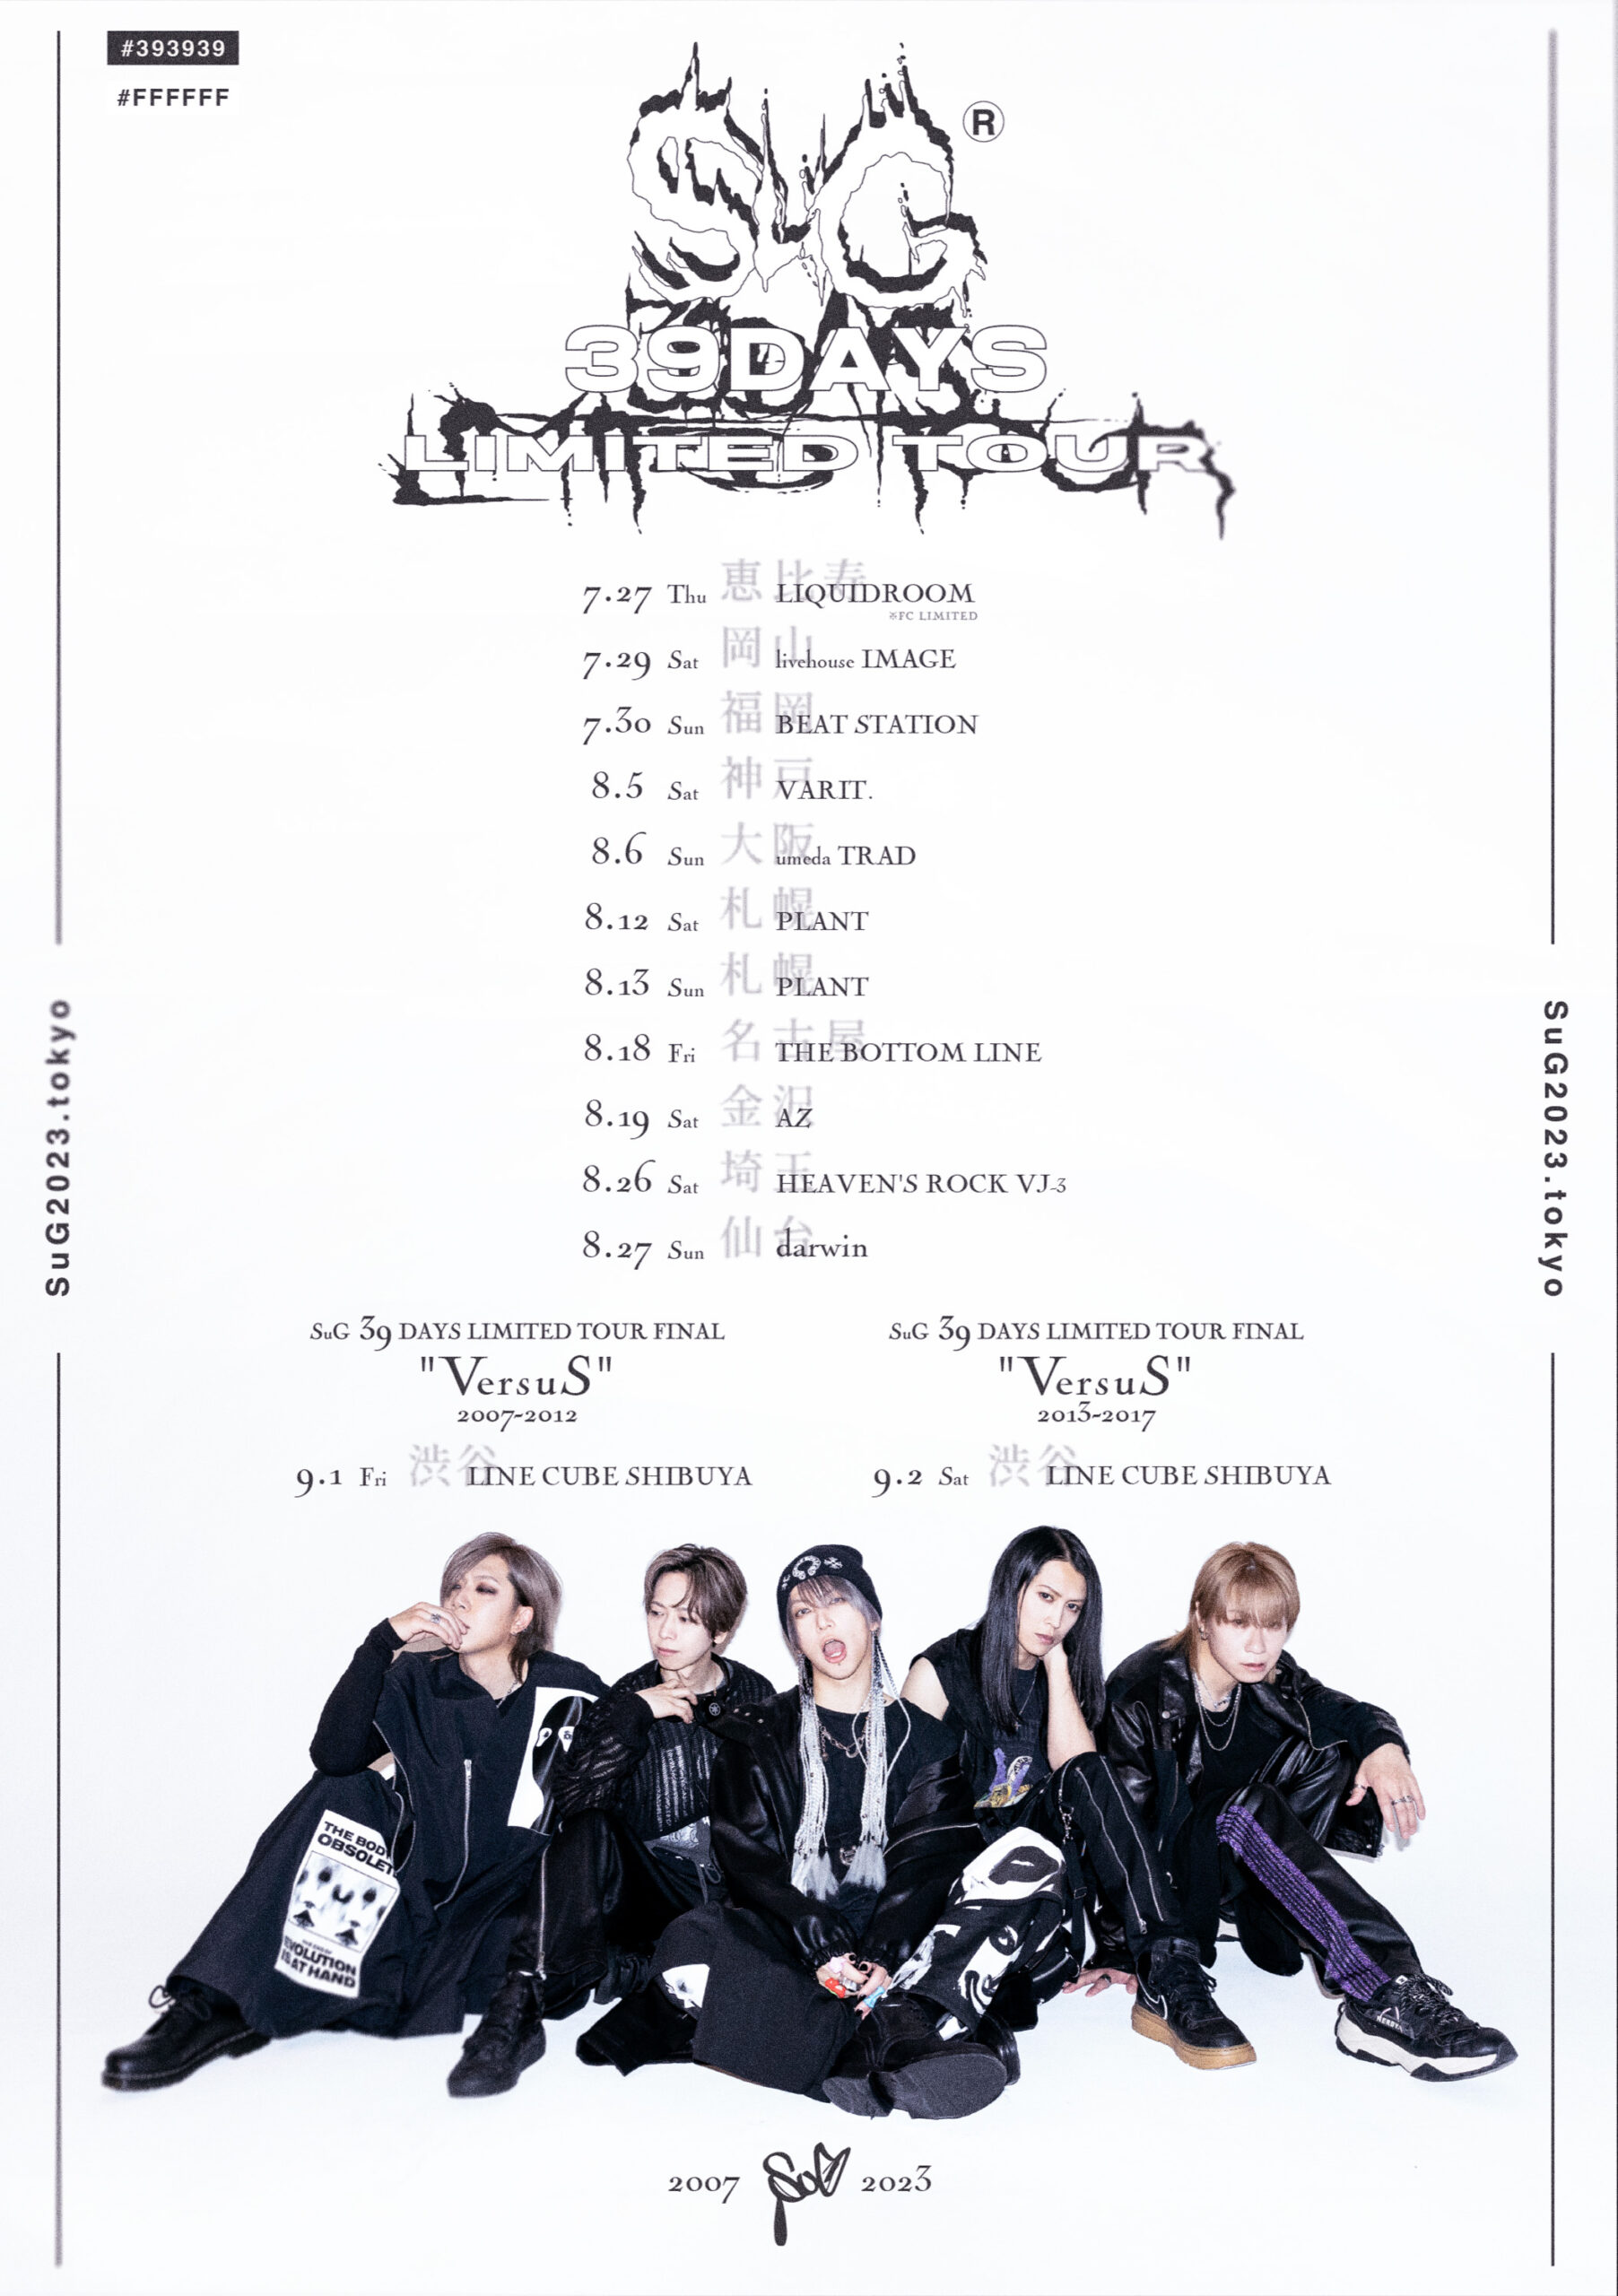 SuG 39 DAYS  LIMITED TOUR